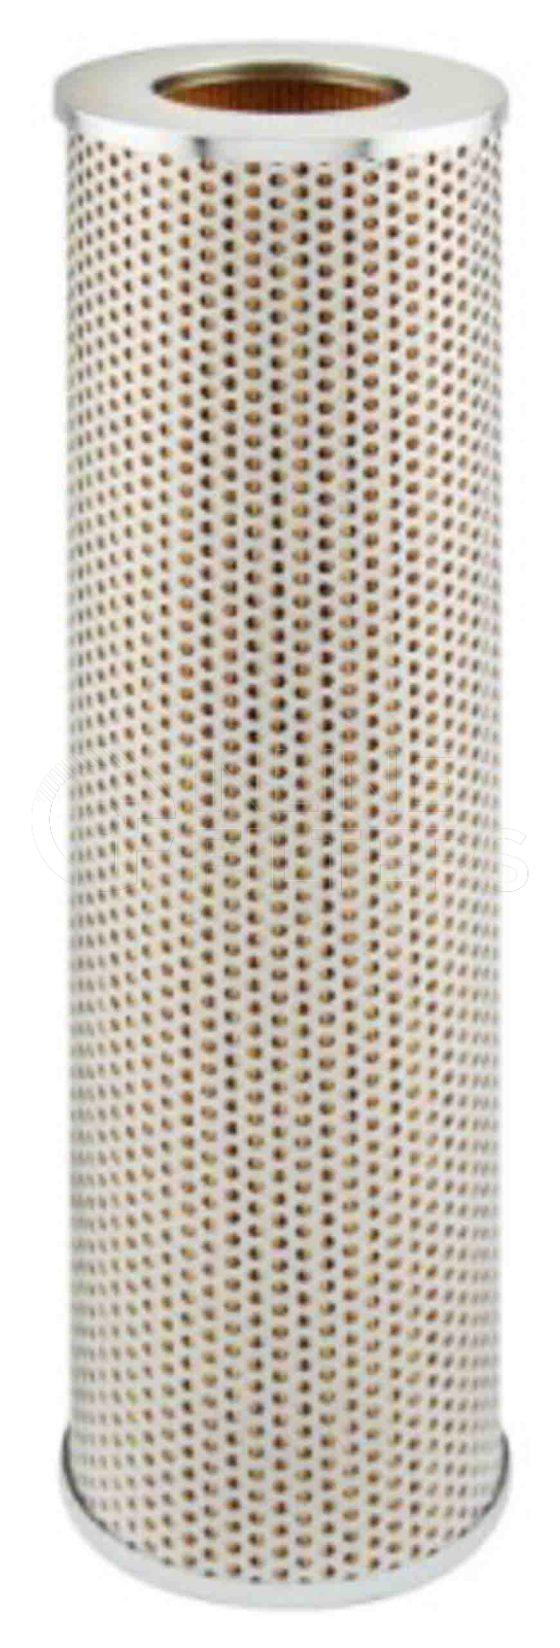 Inline FH58658. Hydraulic Filter Product – Cartridge – Round Product Filter